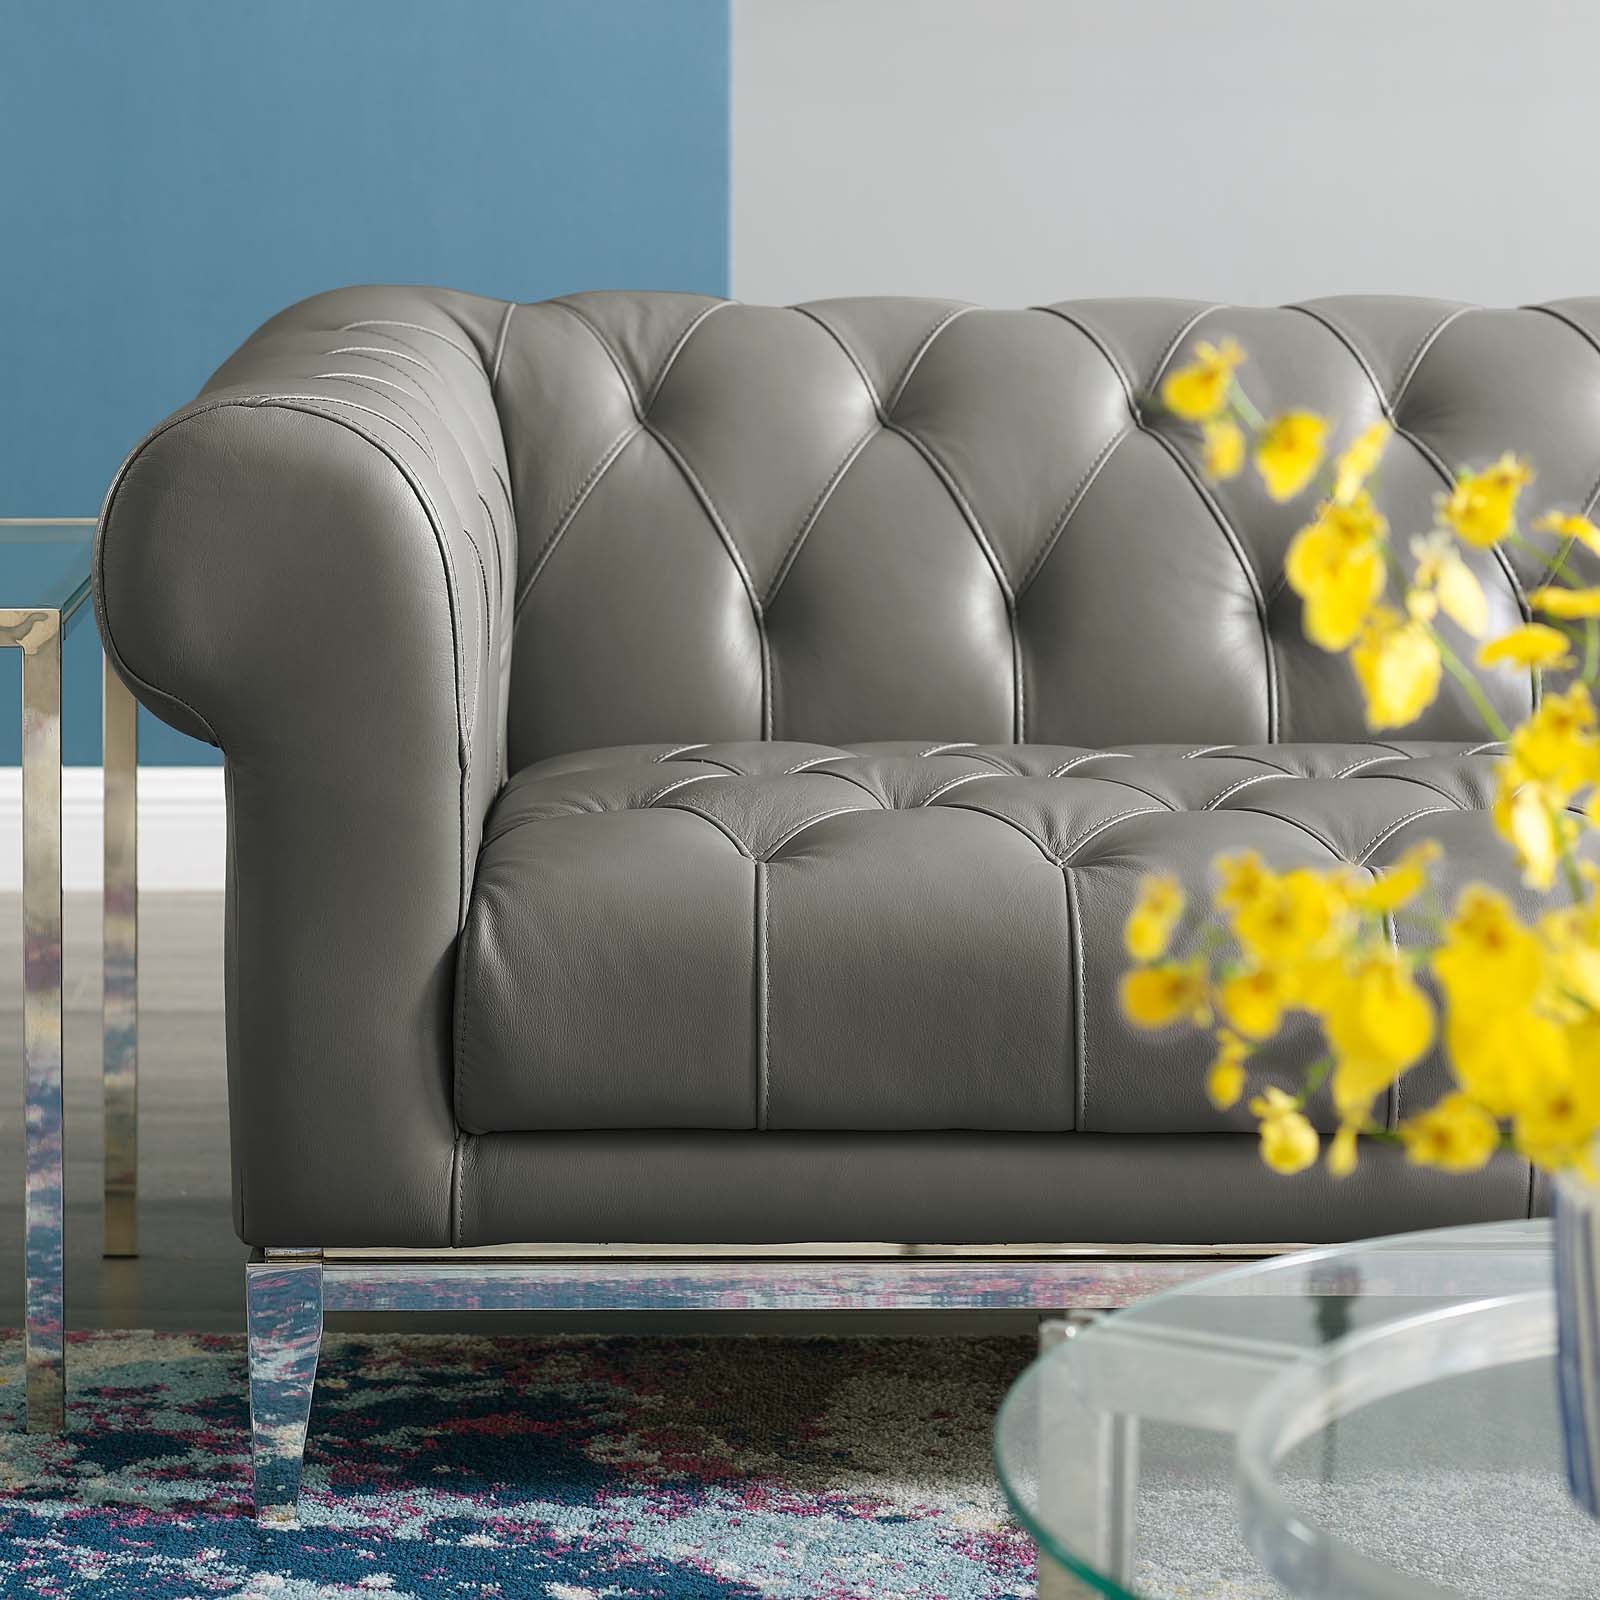 Modway Loveseats - Idyll Tufted Button Upholstered Leather Chesterfield Loveseat Gray